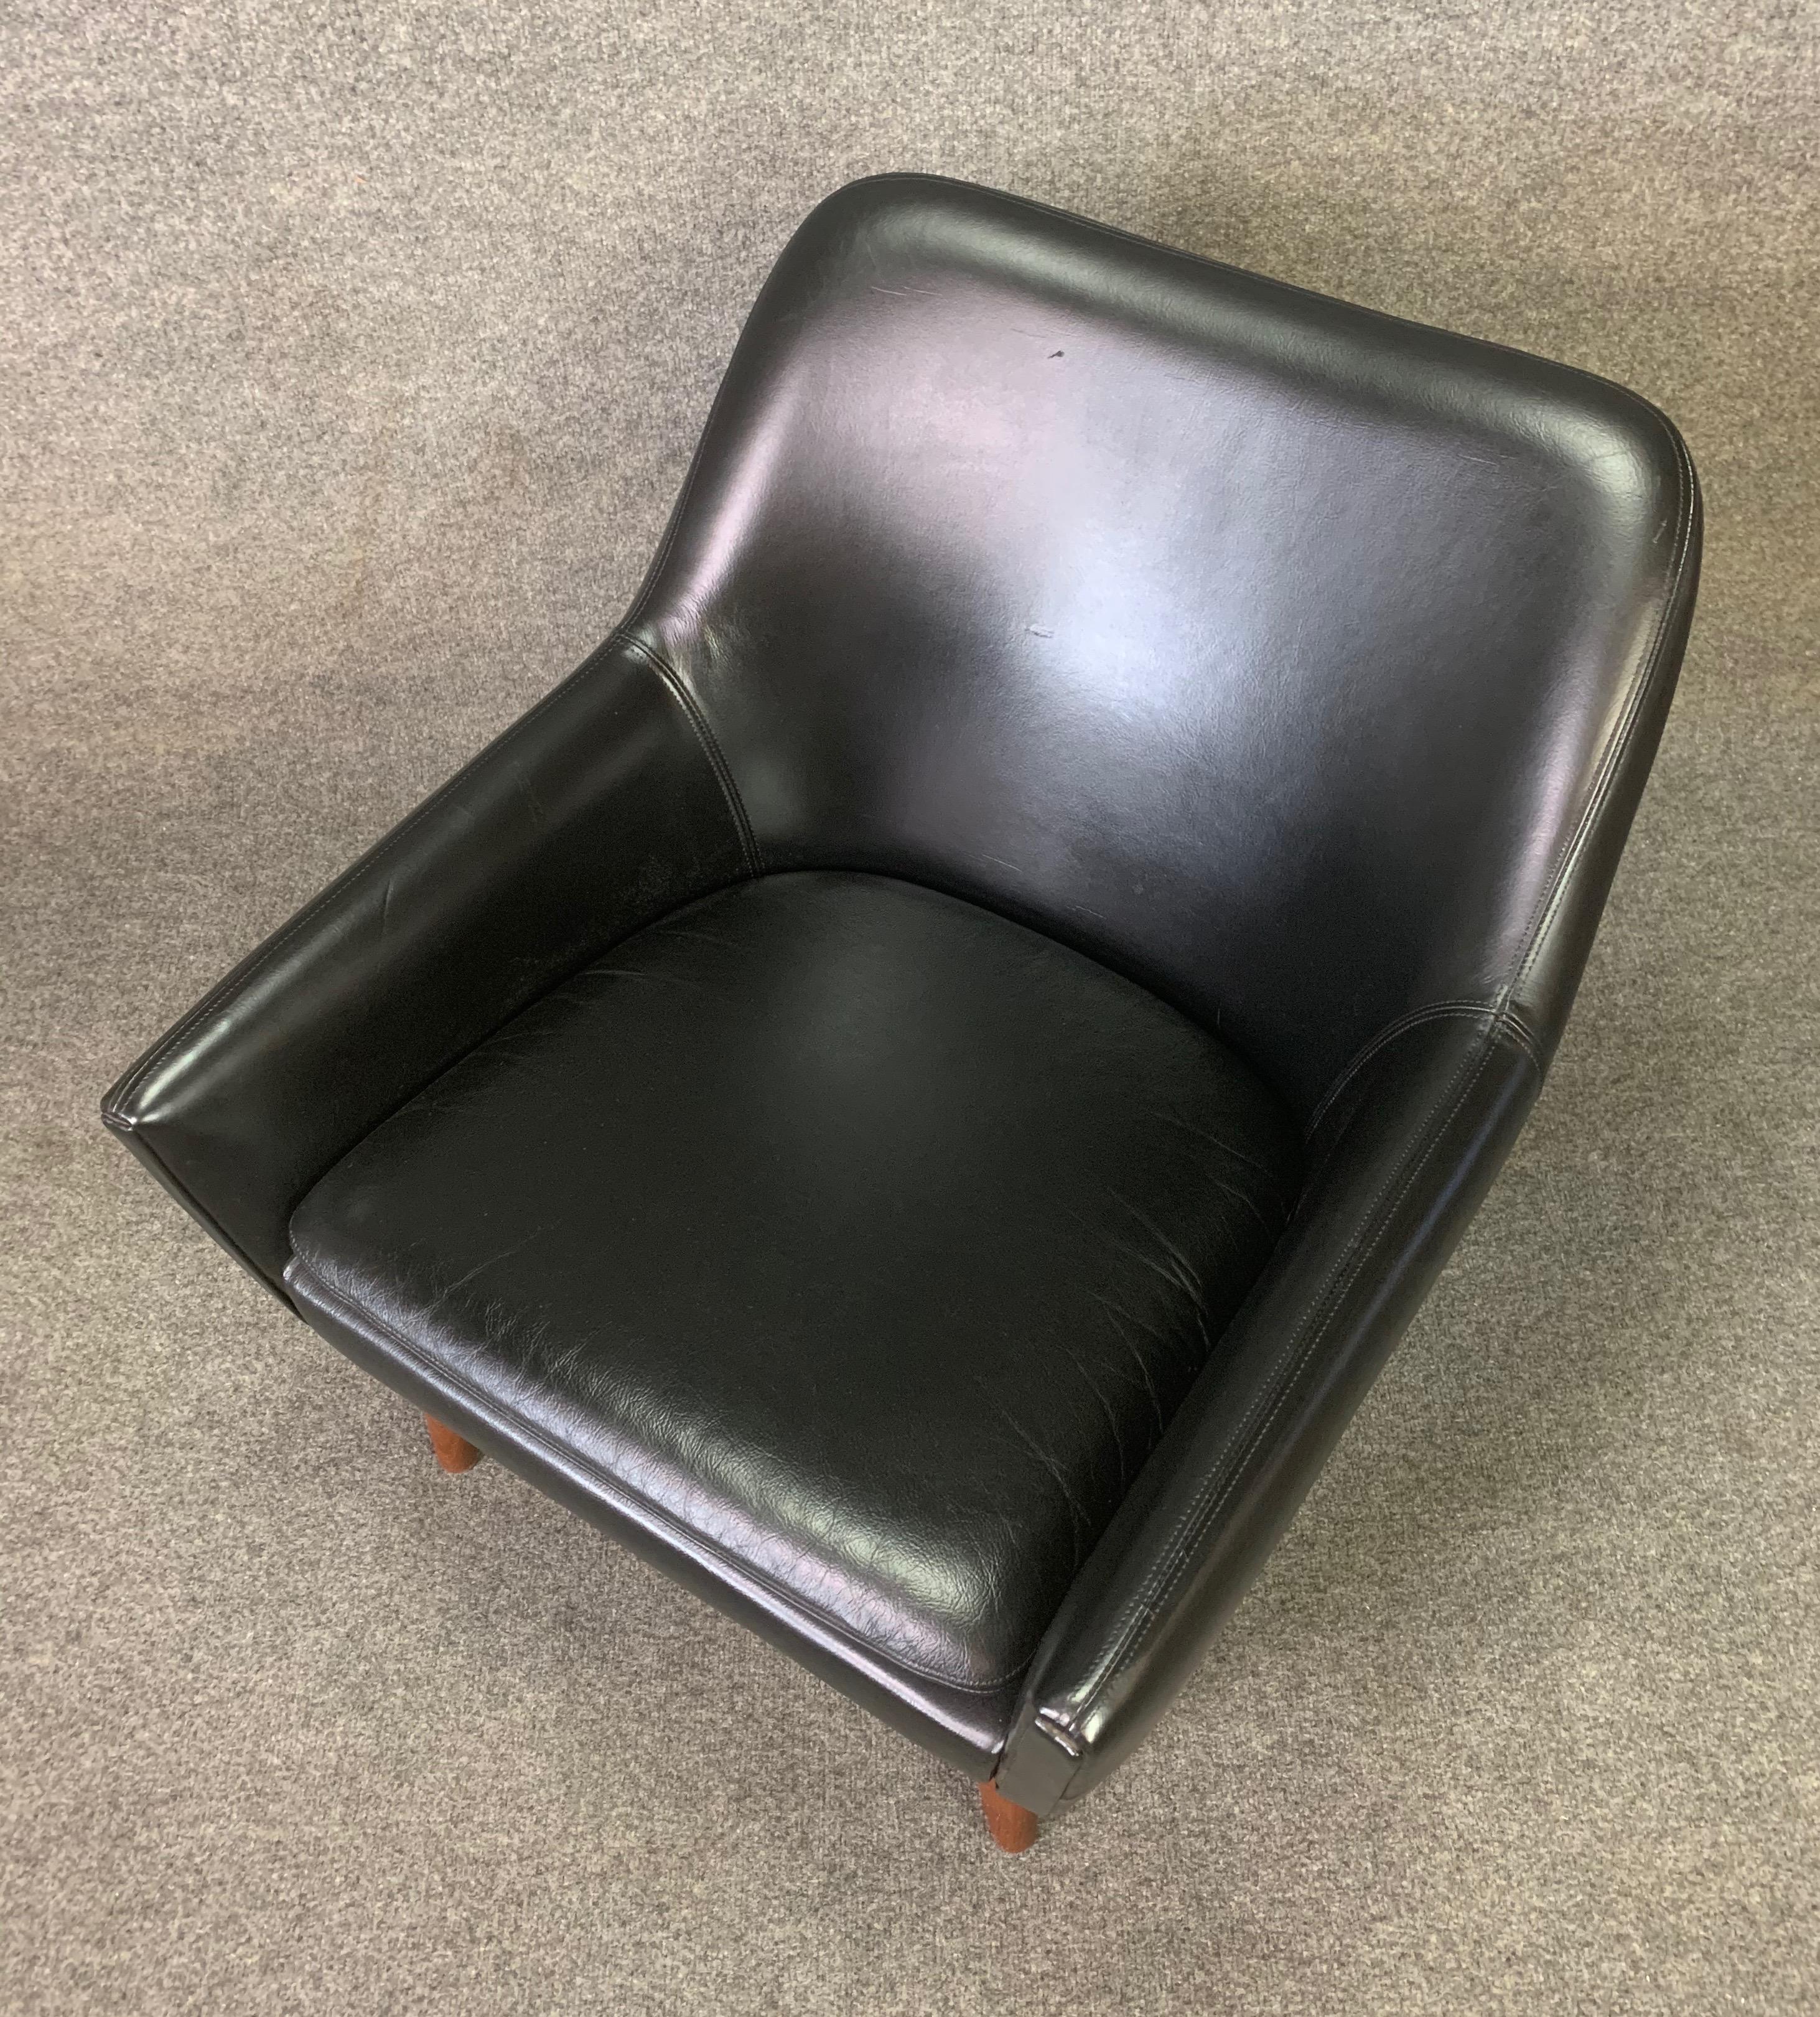 Here is a beautiful 1960s Scandinavian Modern easy chair recently imported from Denmark to California.
This elegant chair, with its organic lines, features a leather seat which has been professionally reconditioned and shows very well. The chair